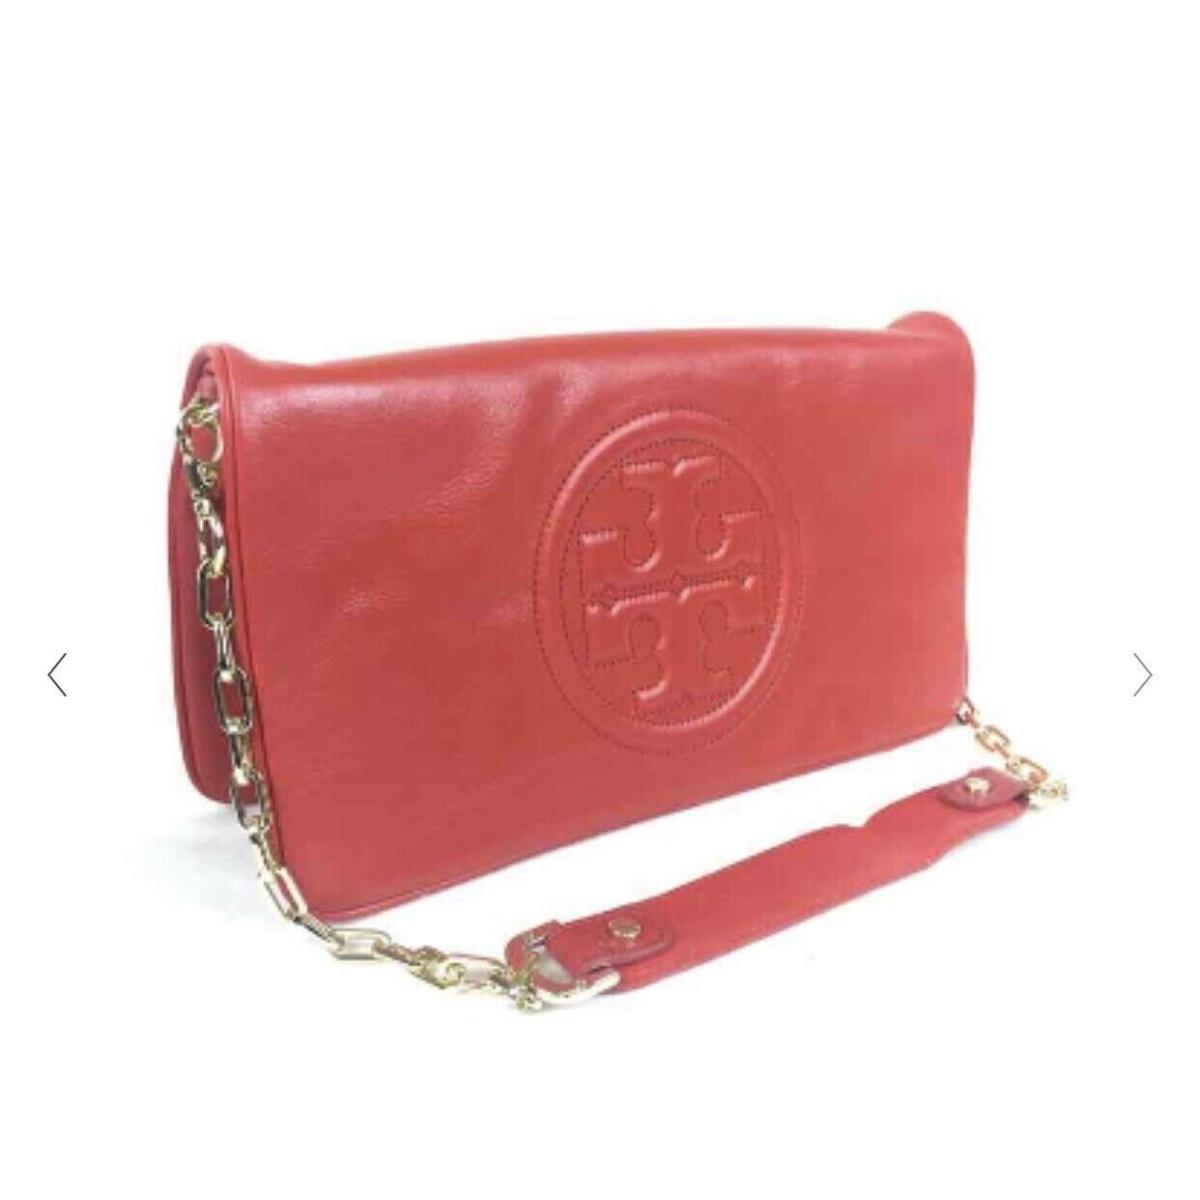 Tory Burch Bombe Reva Tory Red Leather Clutch and Shoulder Bag